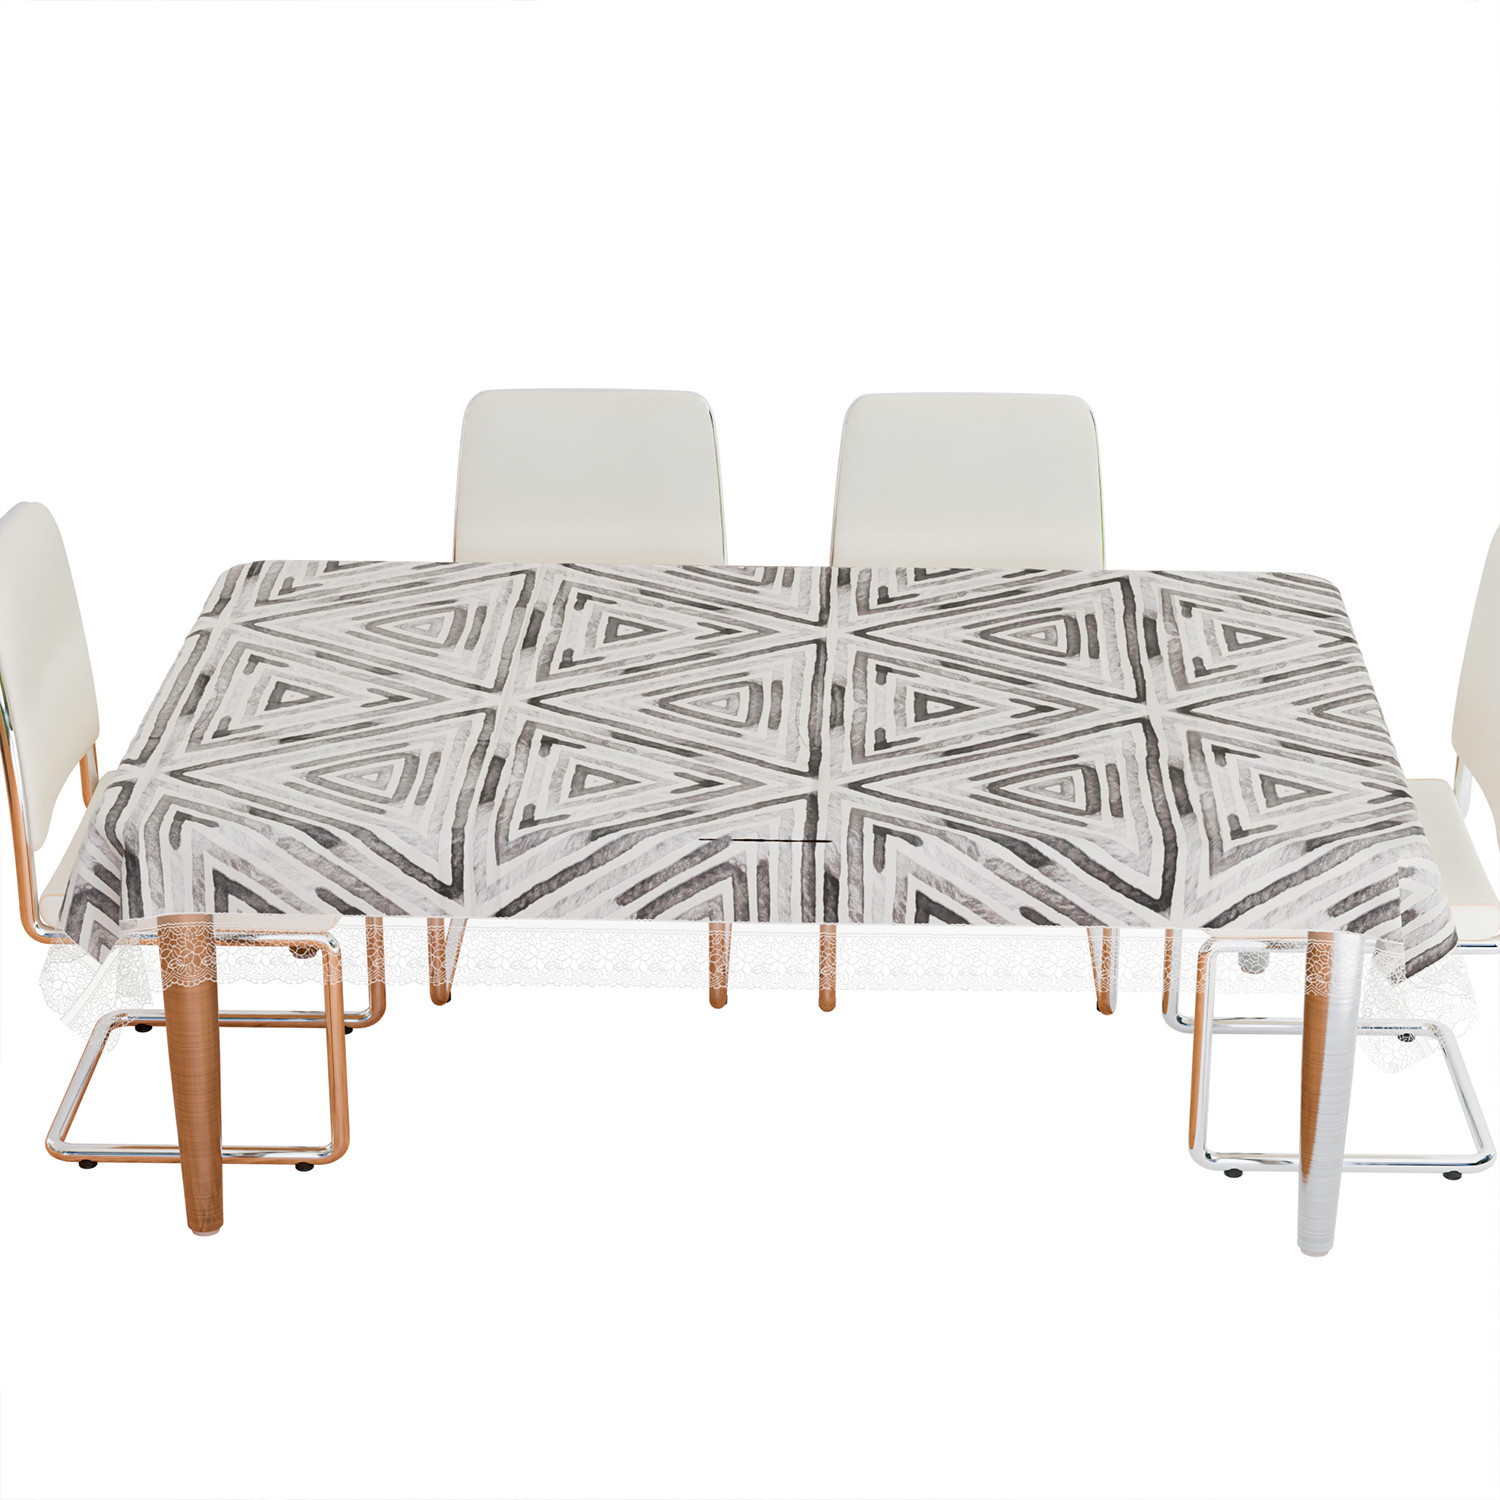 Kuber Industries Dining Table Cover | PVC Table Cloth Cover | 6 Seater Table Cloth | Triangle Table Cover | Table Protector | Table Cover for Dining Table | 60x90 Inch | DTC | Gray